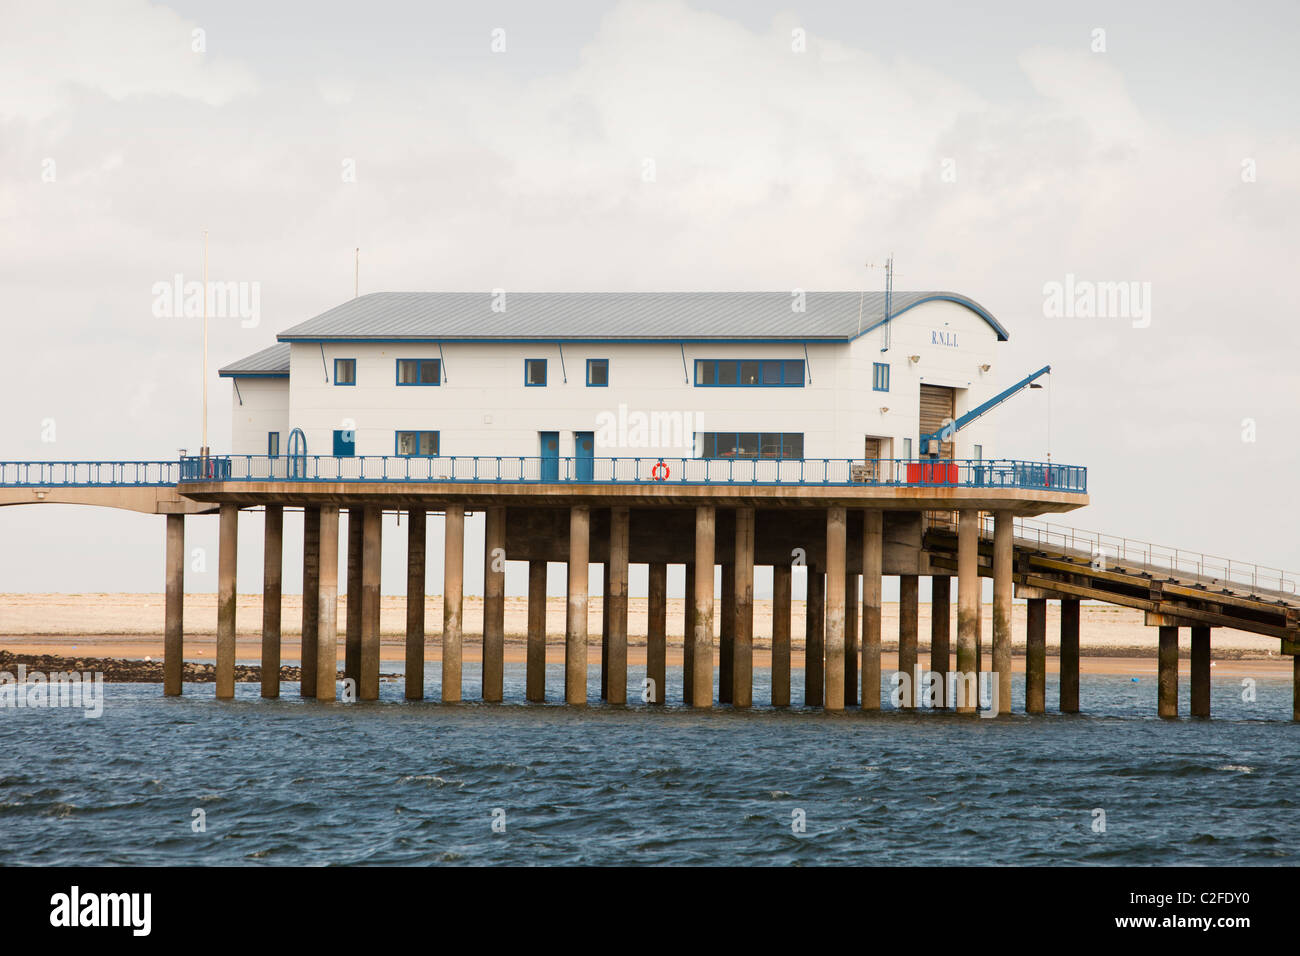 The lifeboat station on the Walney Channel, near Barrow in Furness, UK. Stock Photo